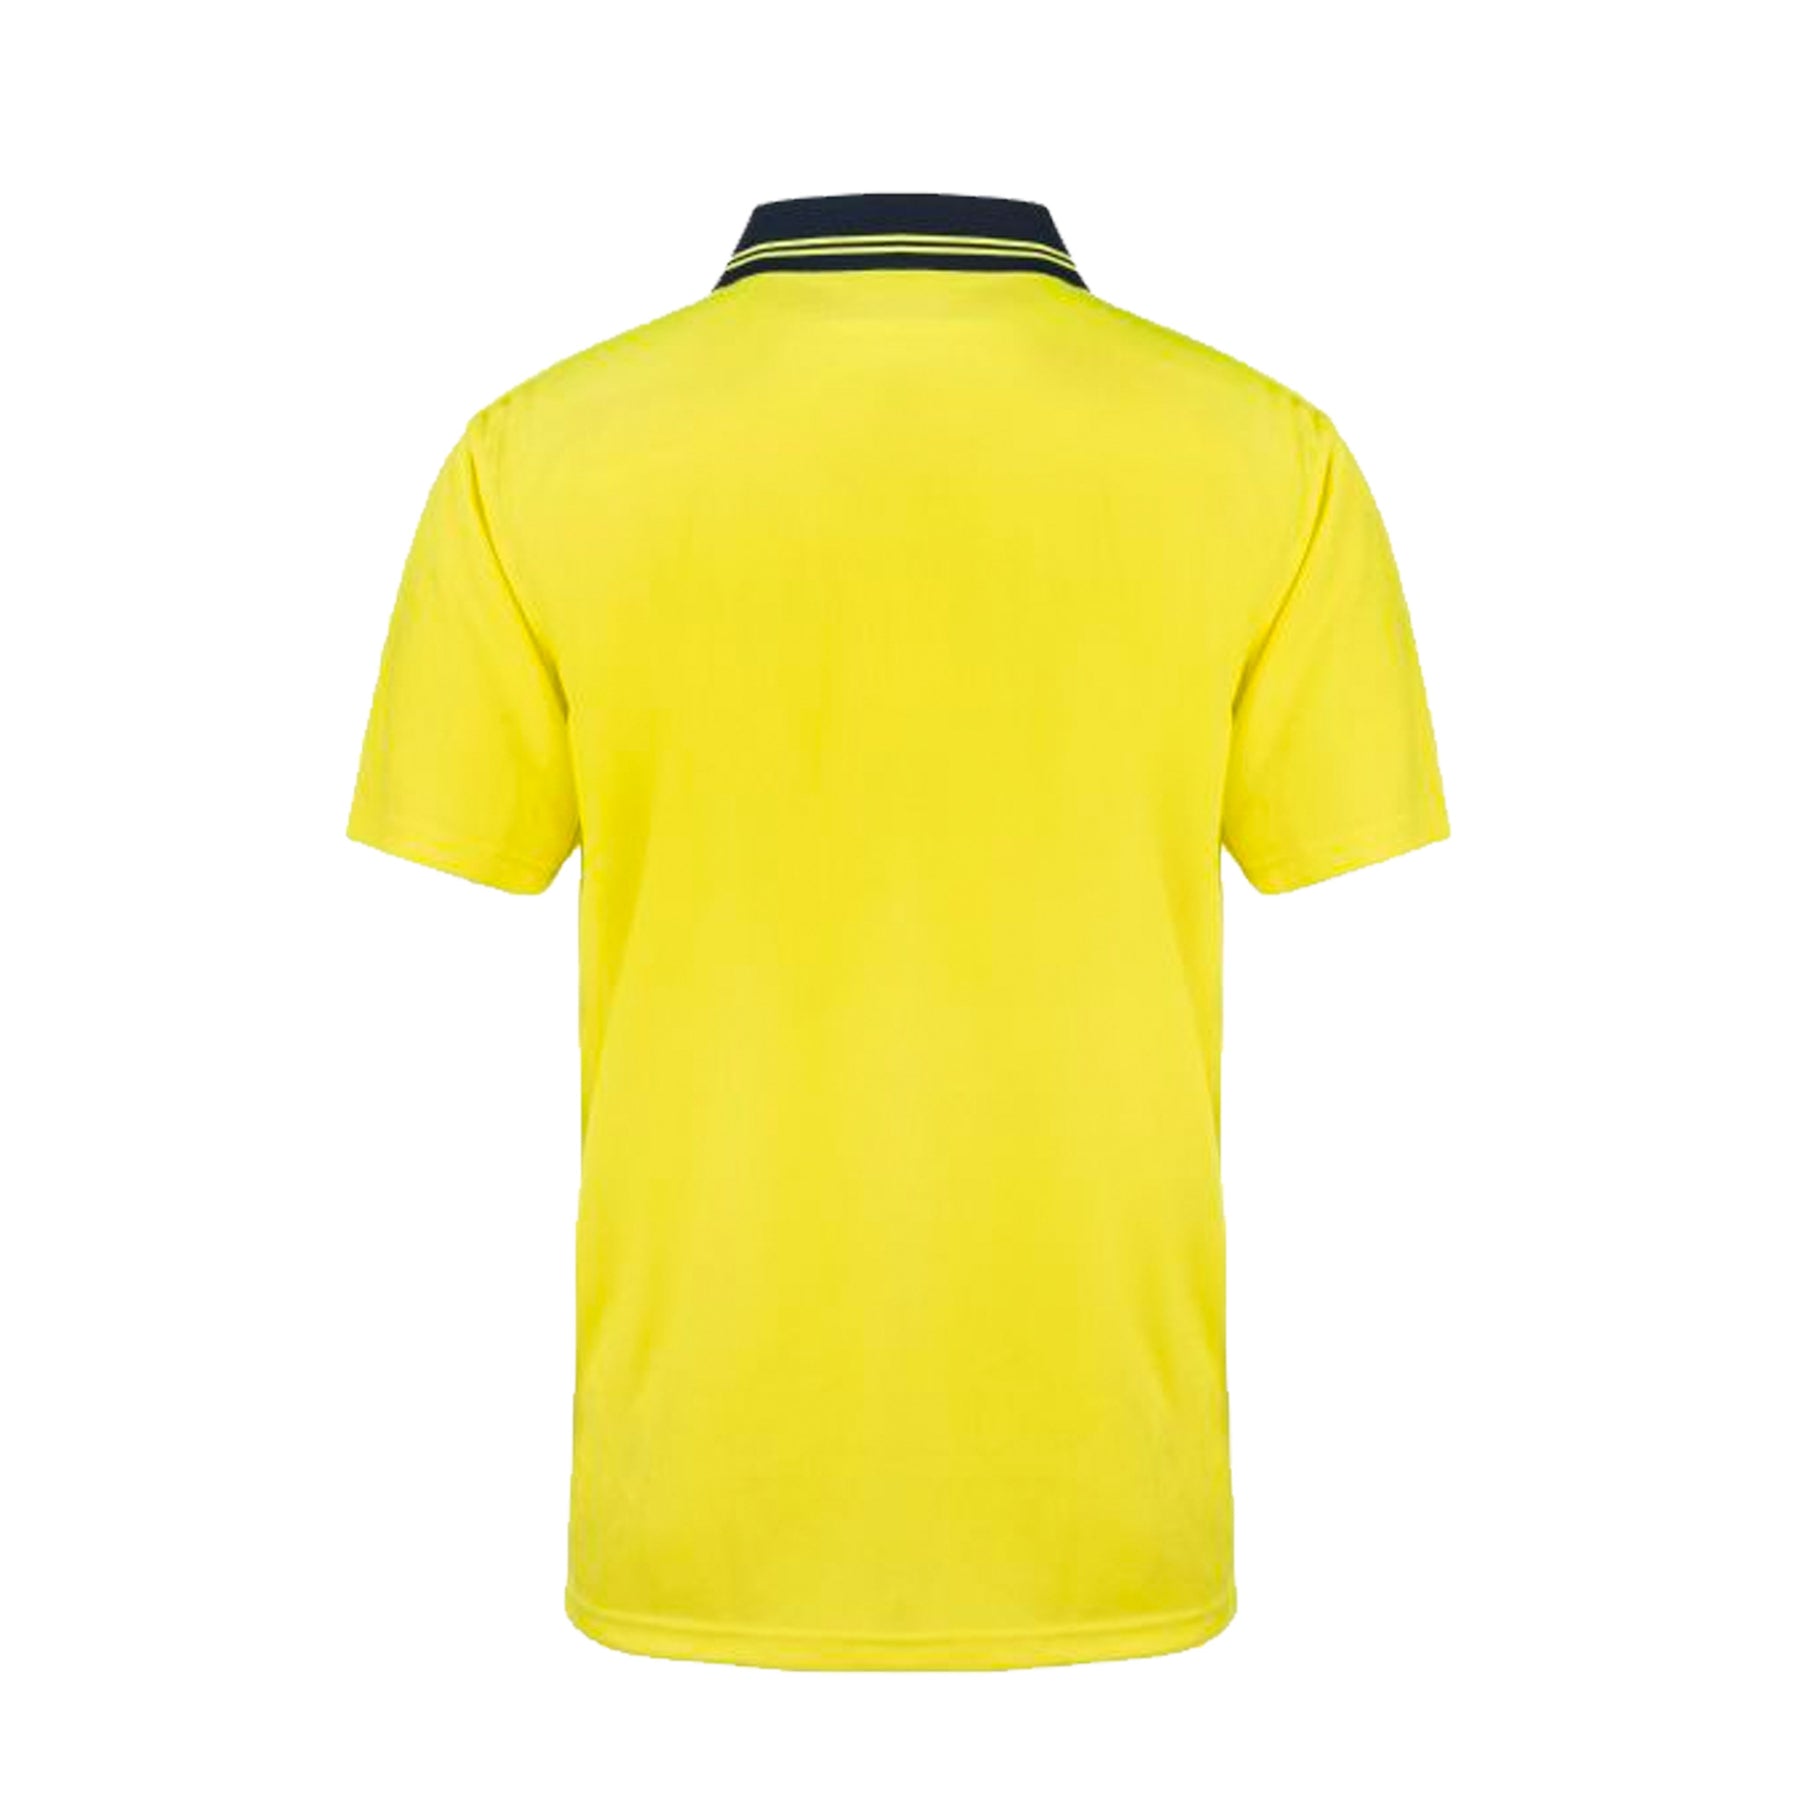 hi vis two tone short sleeve micromesh polo in yellow navy